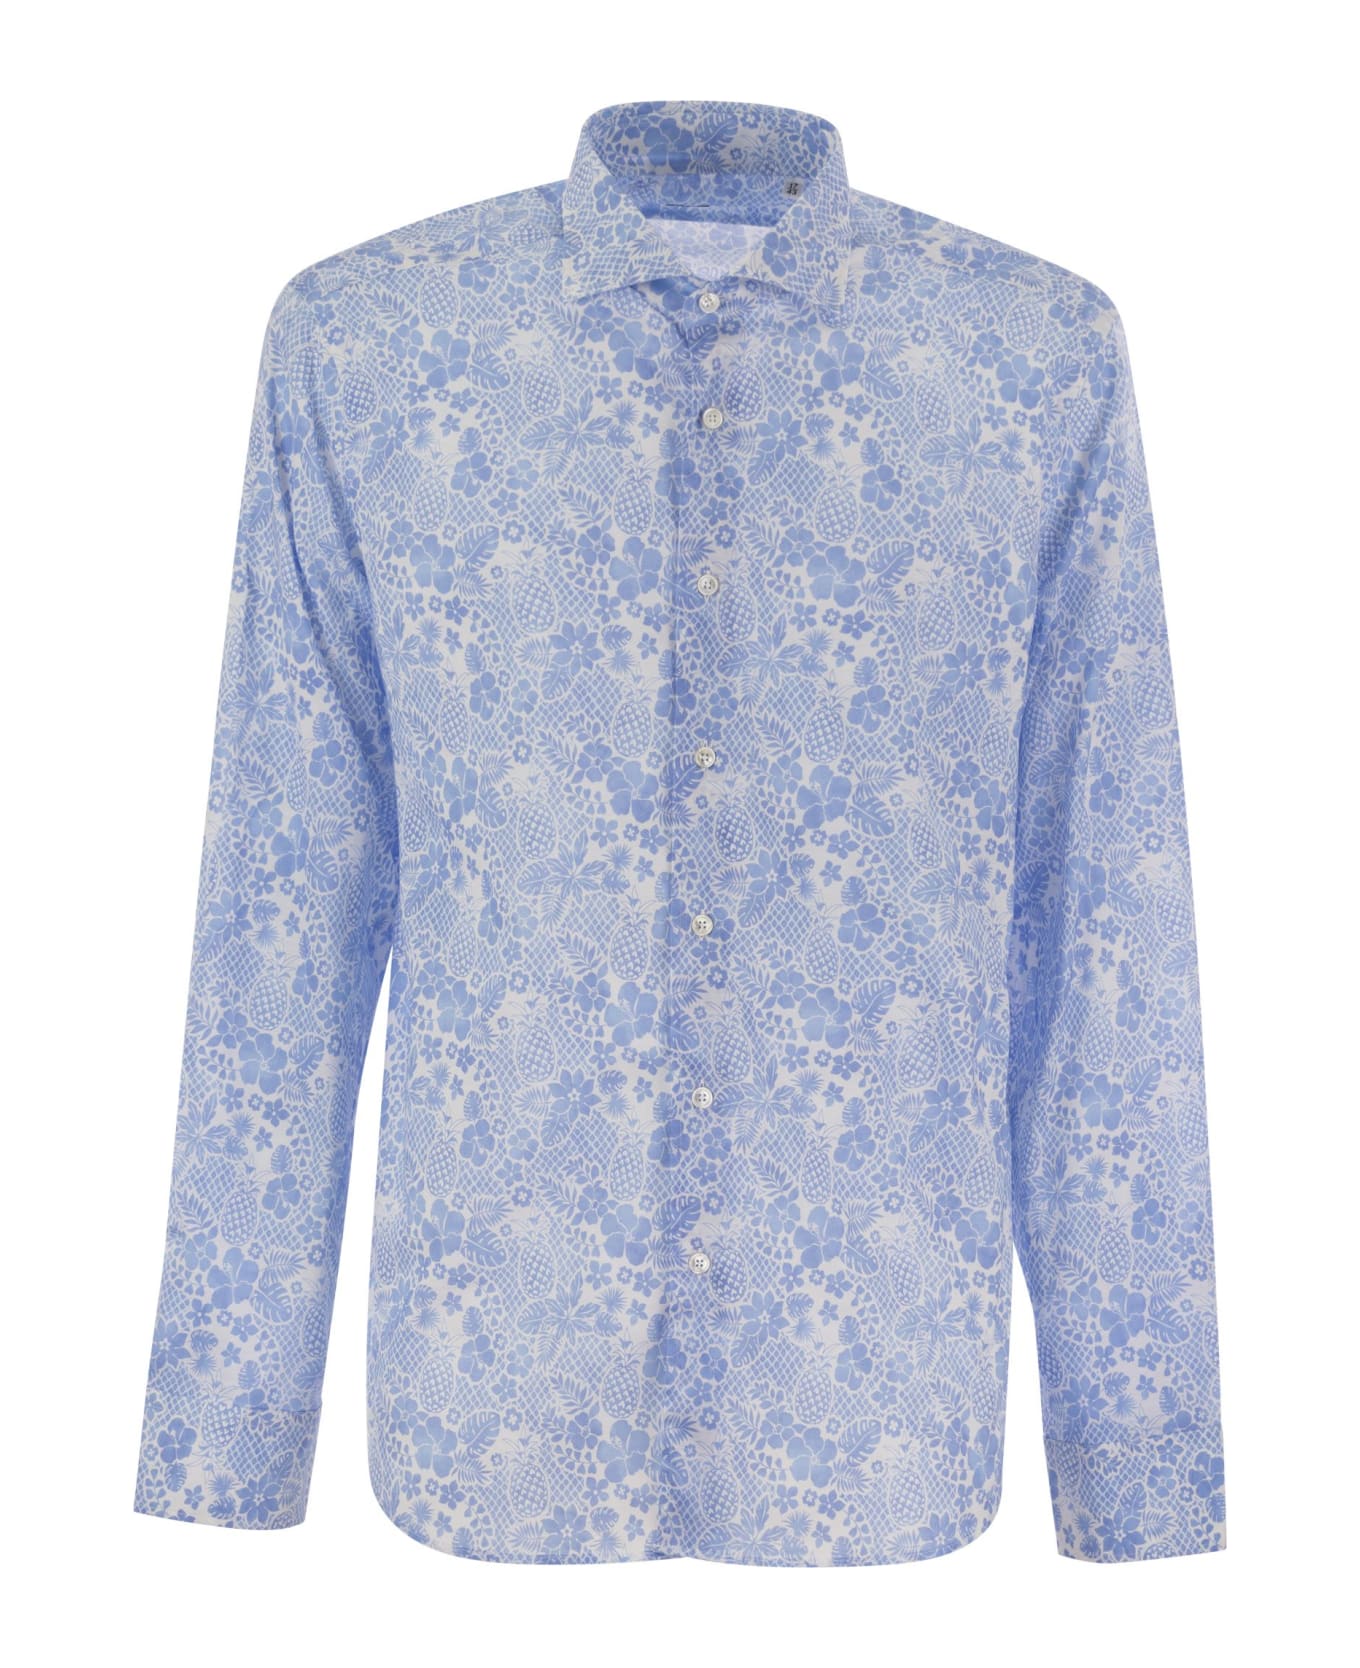 Fedeli Printed Stretch Cotton Voile Shirt - Light Blue シャツ